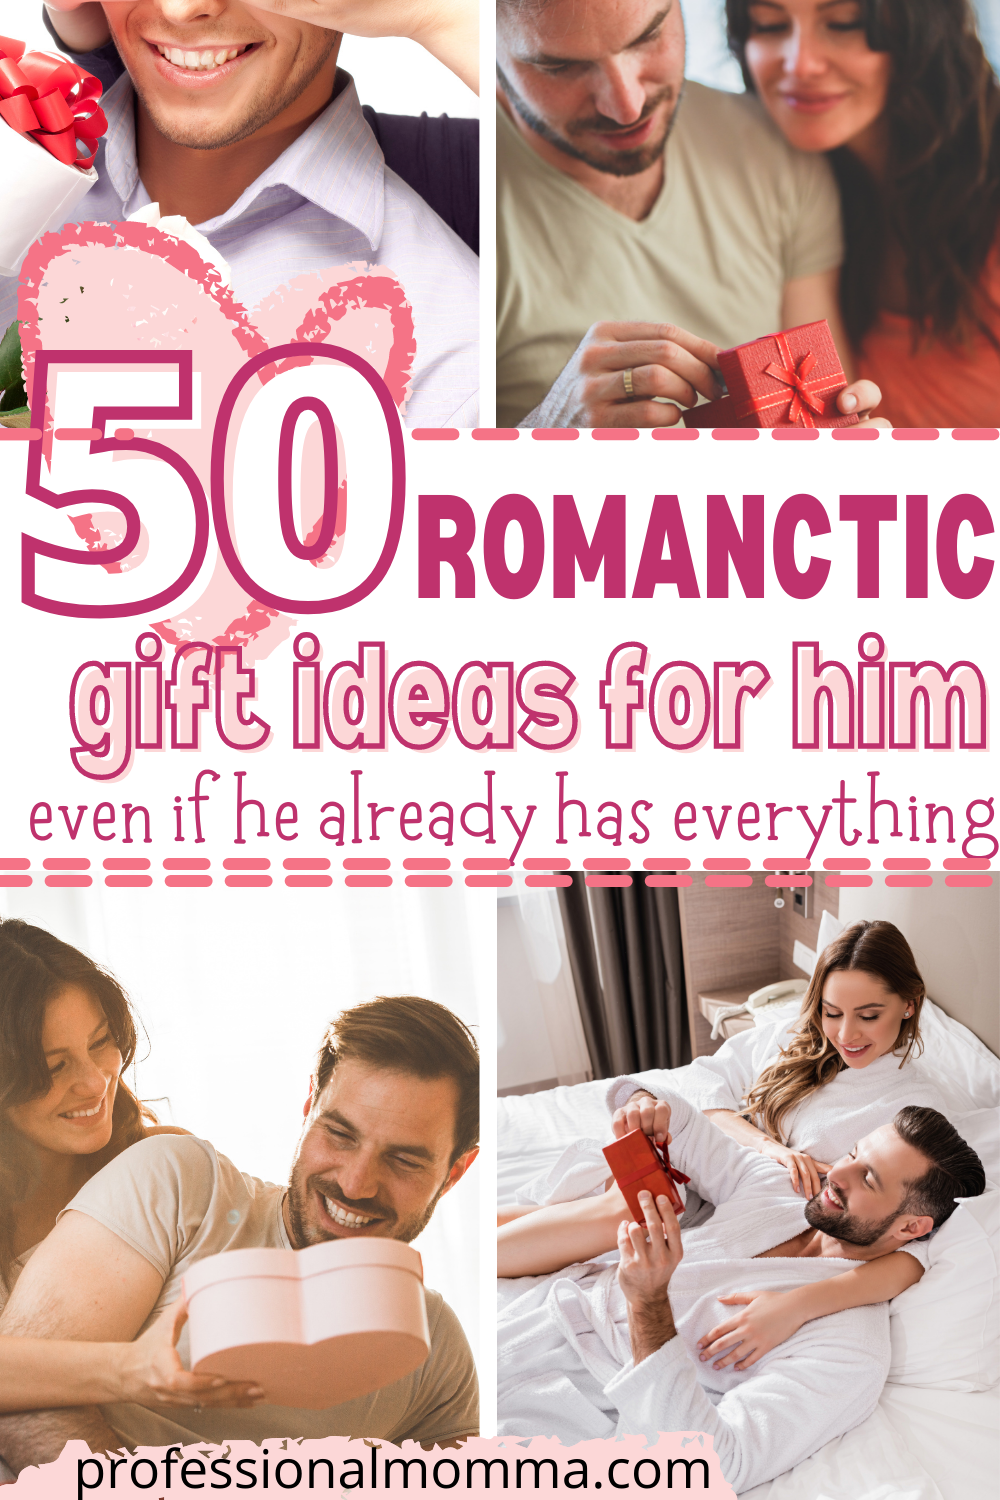 50 different gift ideas for men